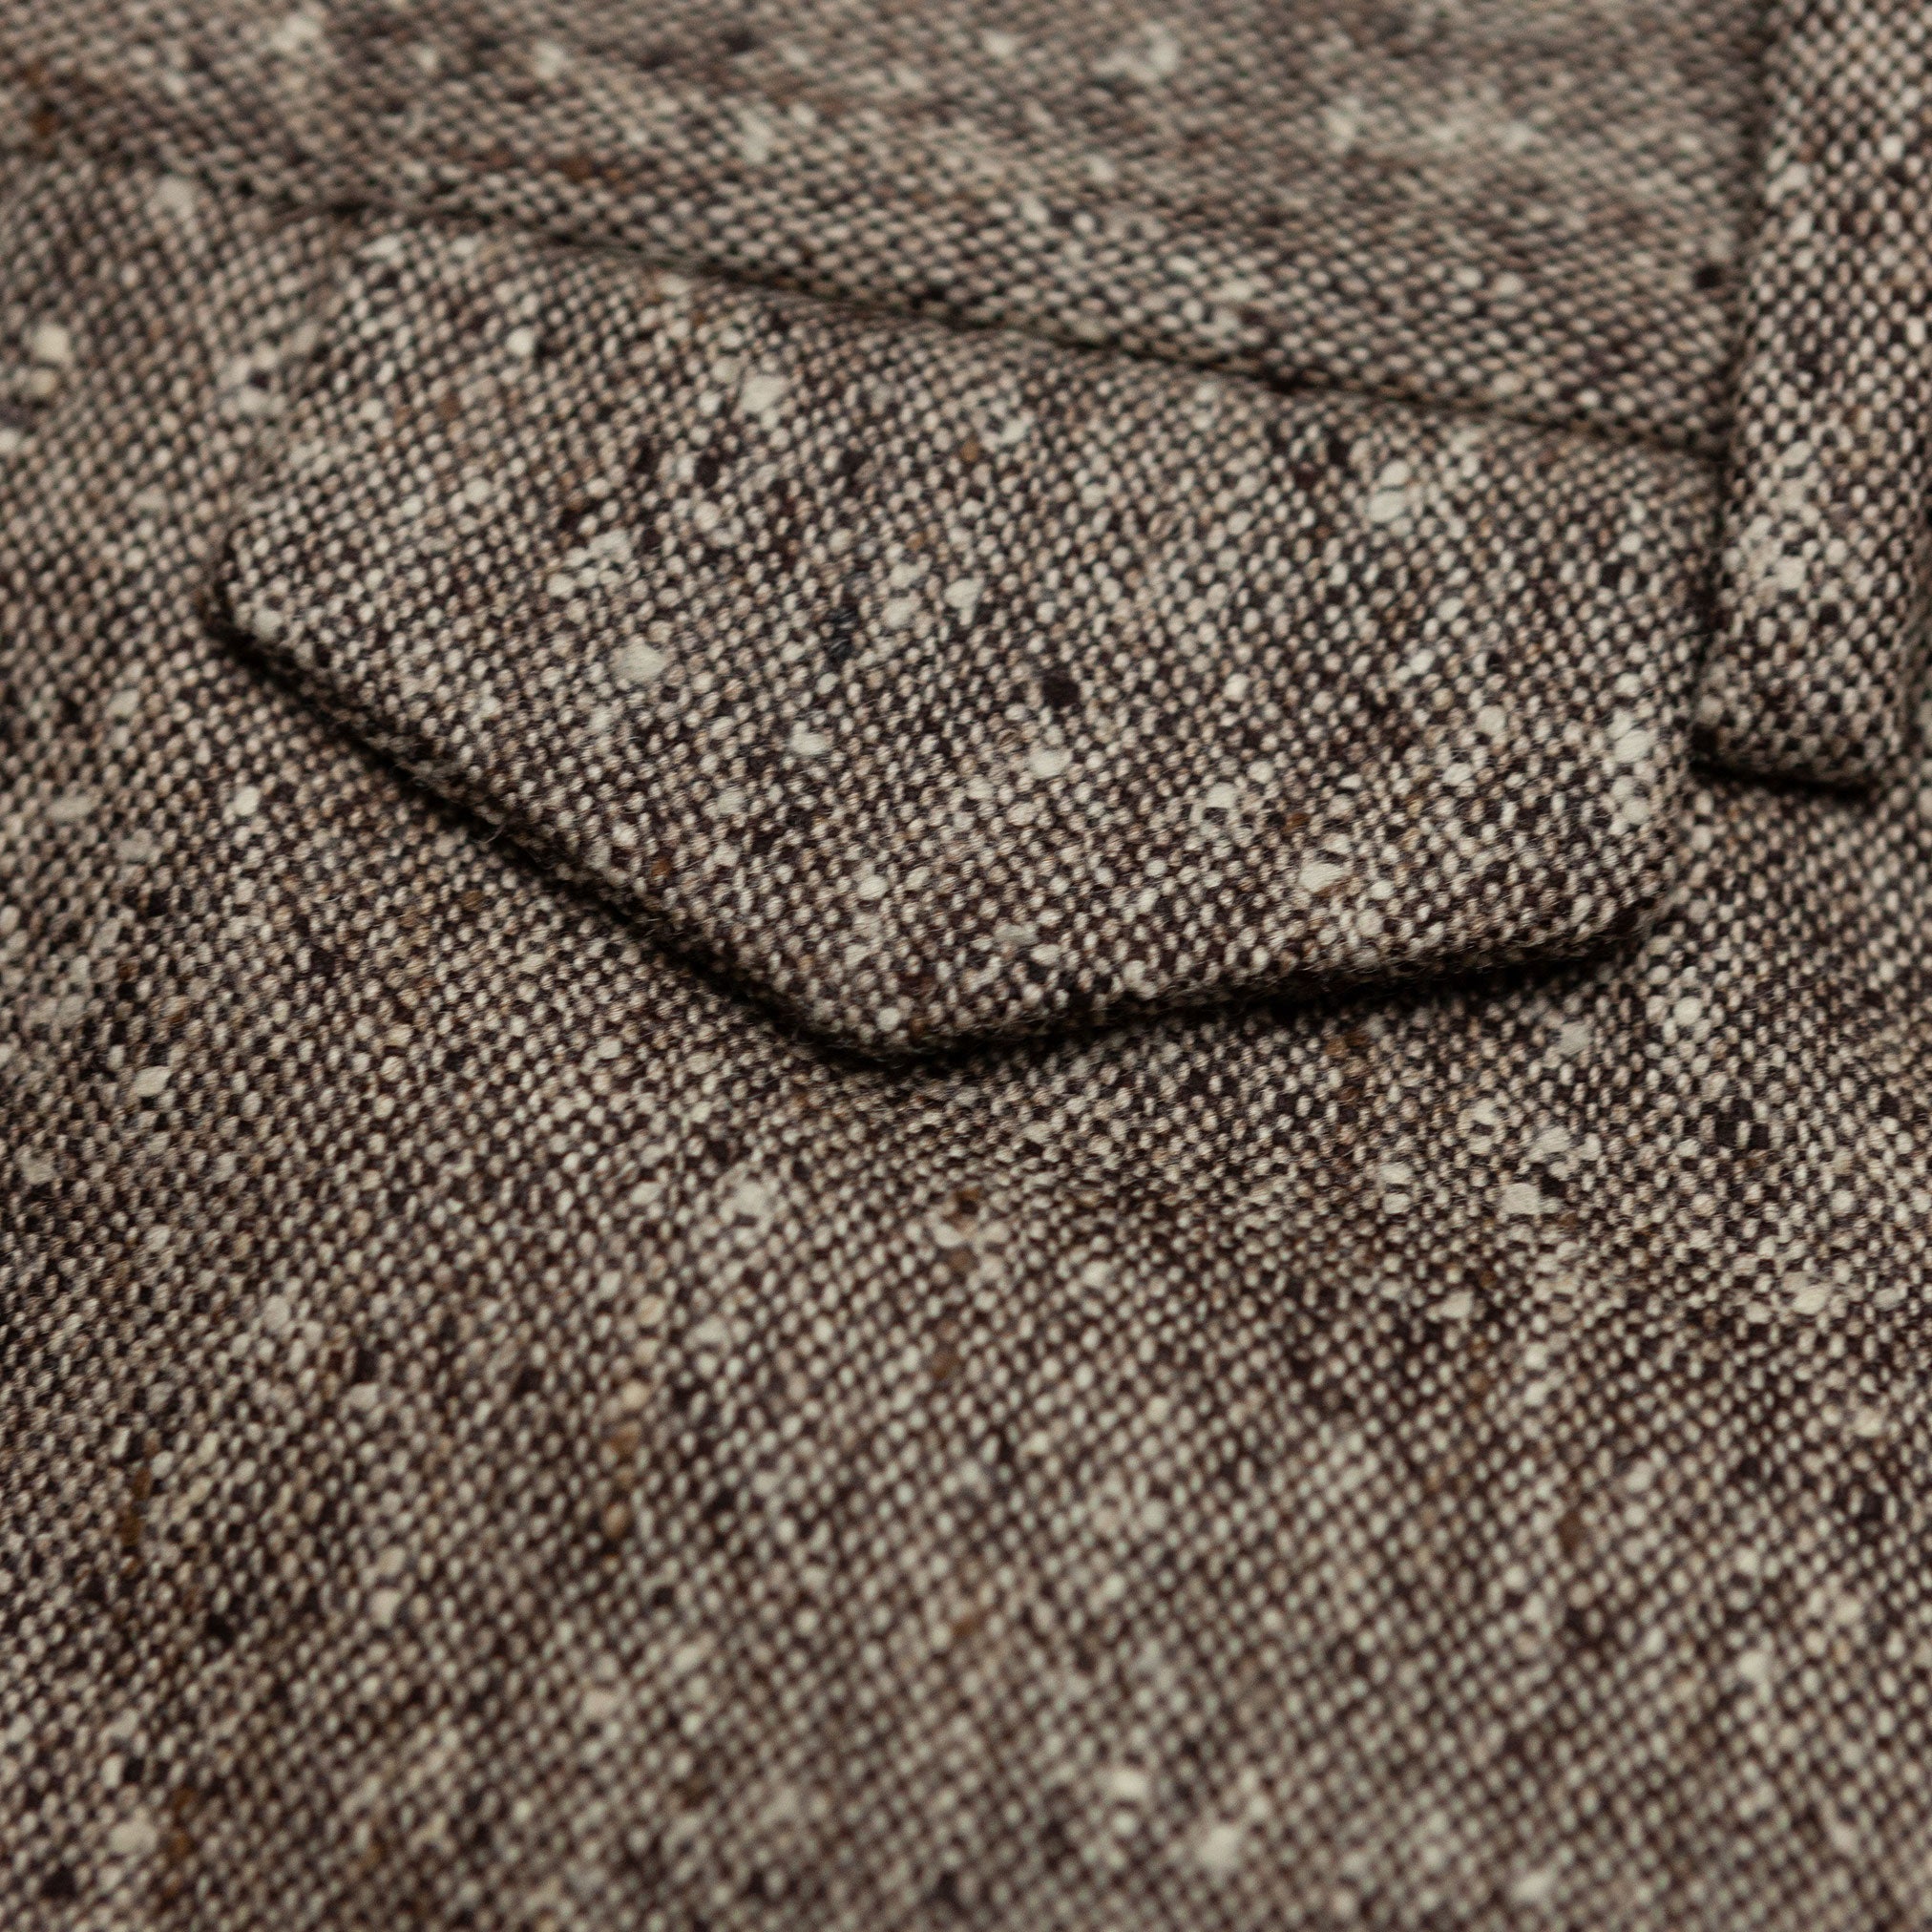 The Havana Fatigues in Speckled Wool